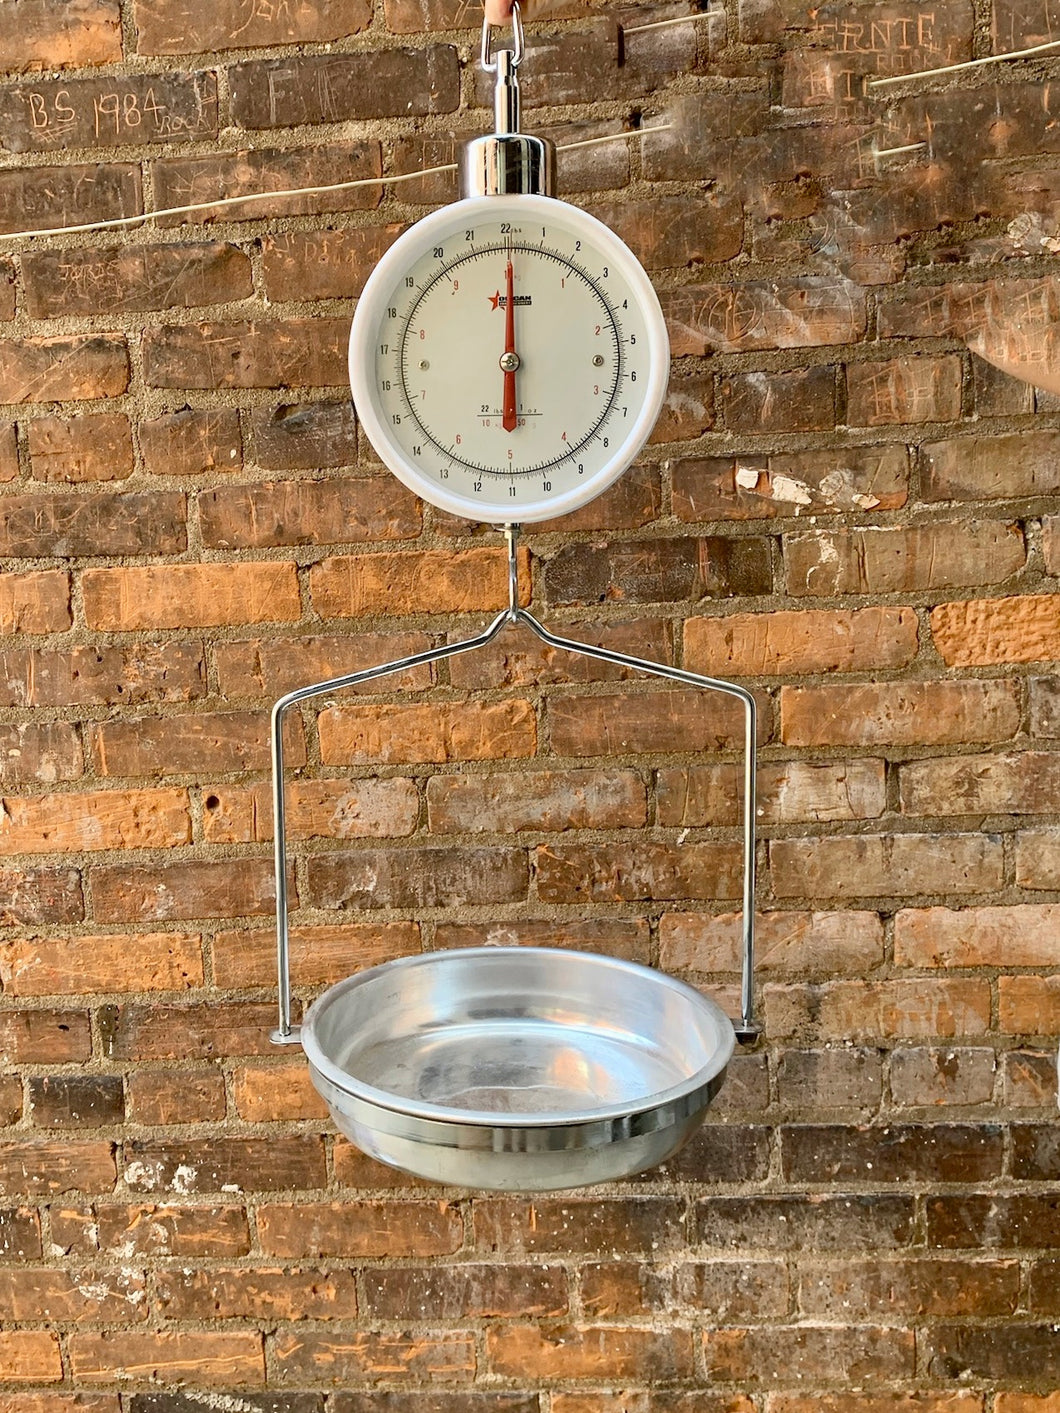 Super Cool Vintage Grocery Store Weight Scale